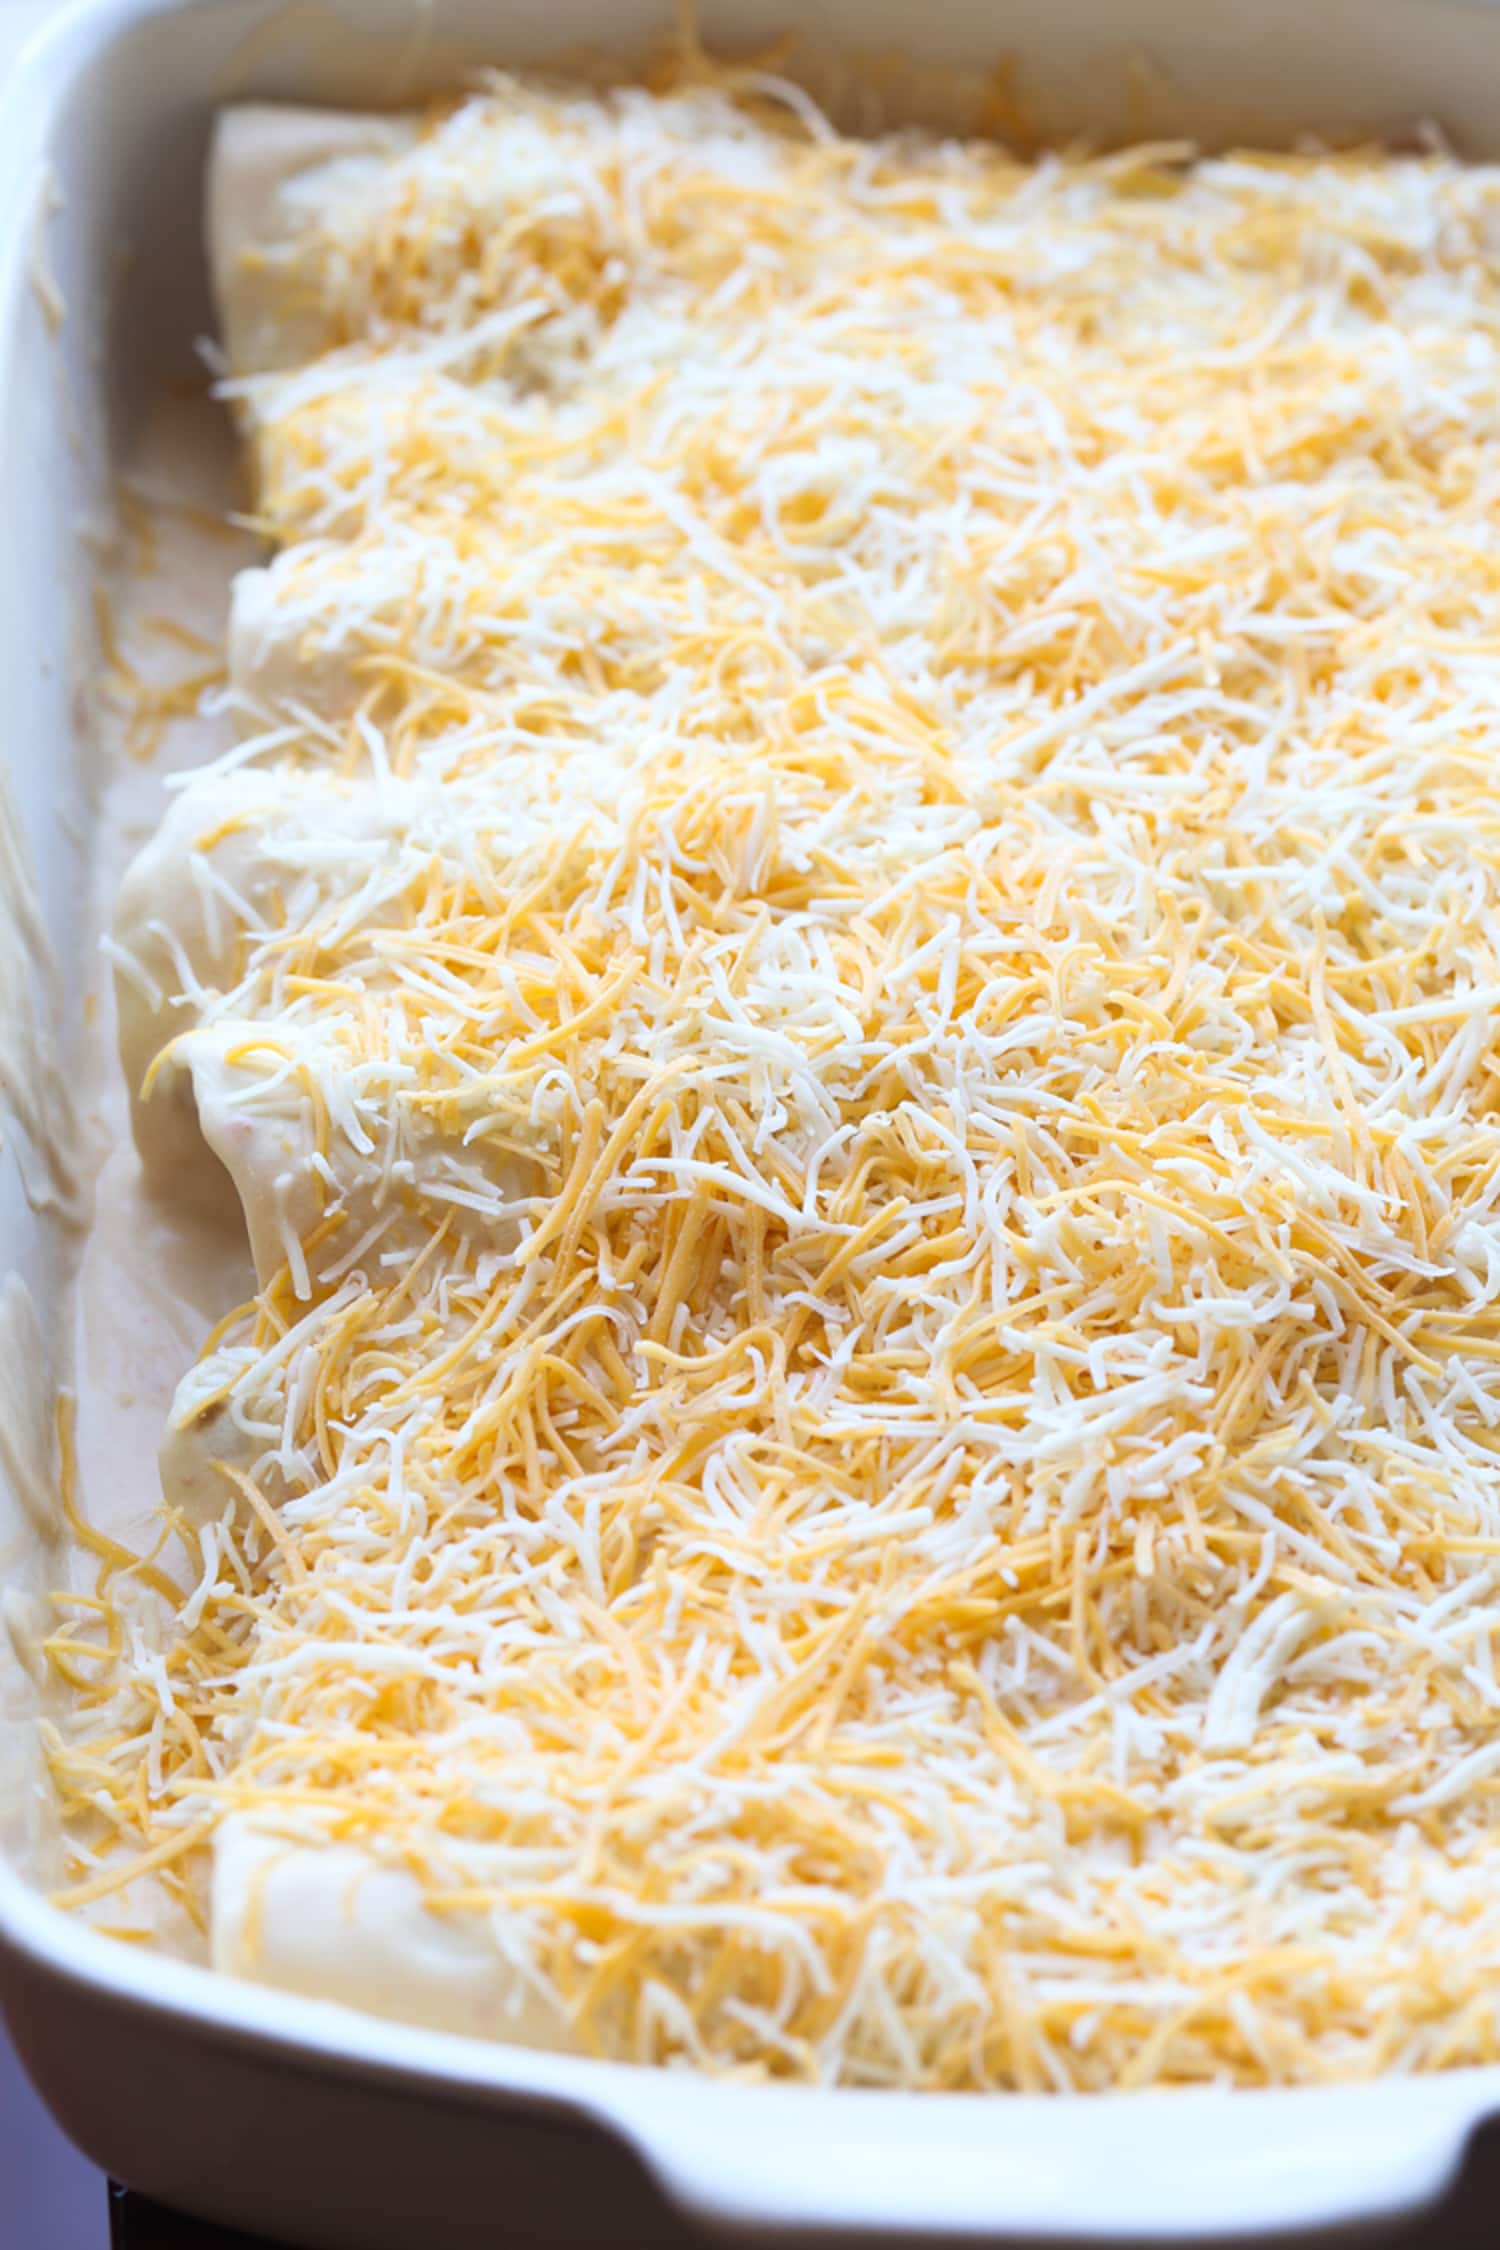 chicken filled rolled up tortillas covered in grated cheese in a baking dish